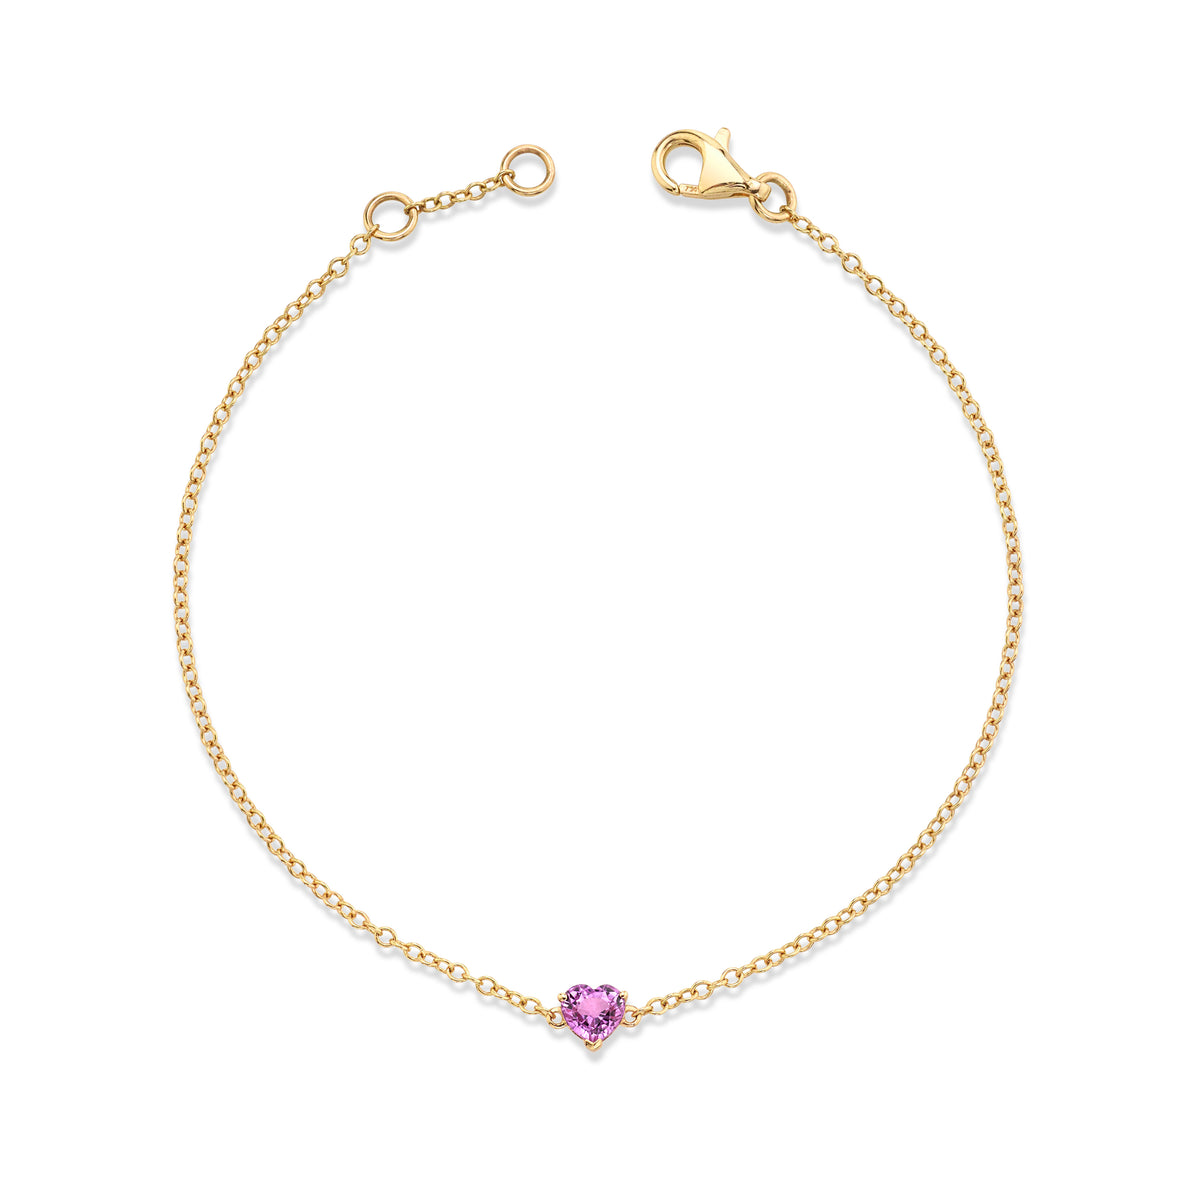 READY TO SHIP PINK SAPPHIRE BABY HEART ANKLET